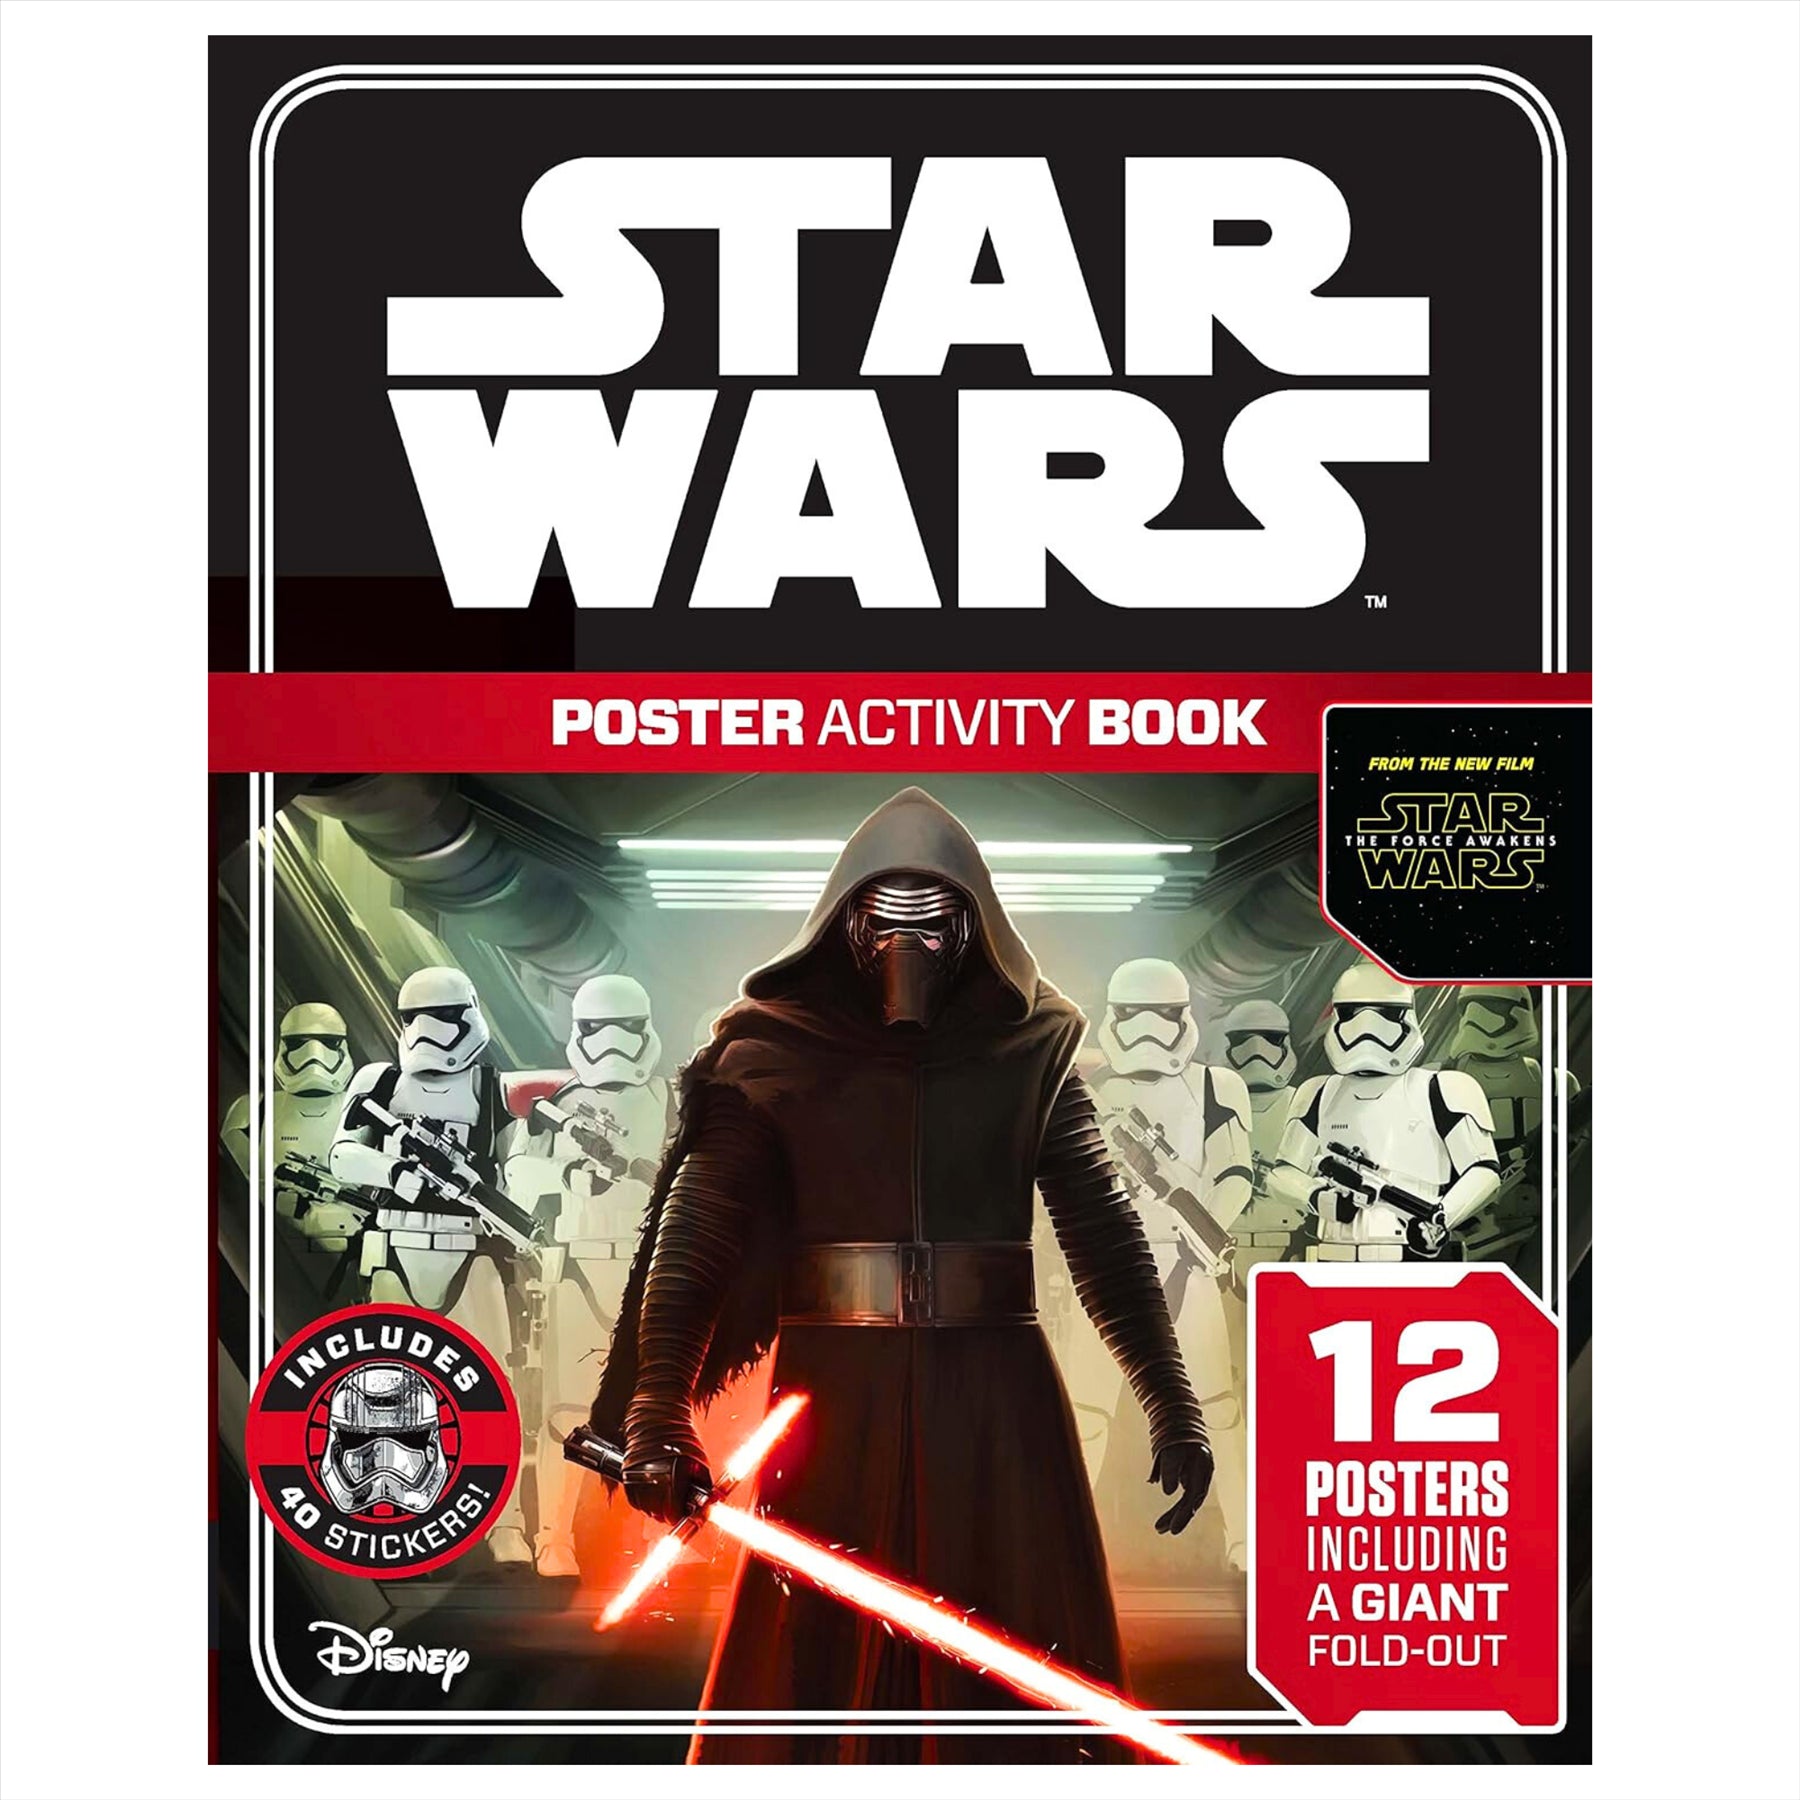 Star Wars The Force Awakens Poster Activity Book - Includes 12 Posters and 40 Stickers